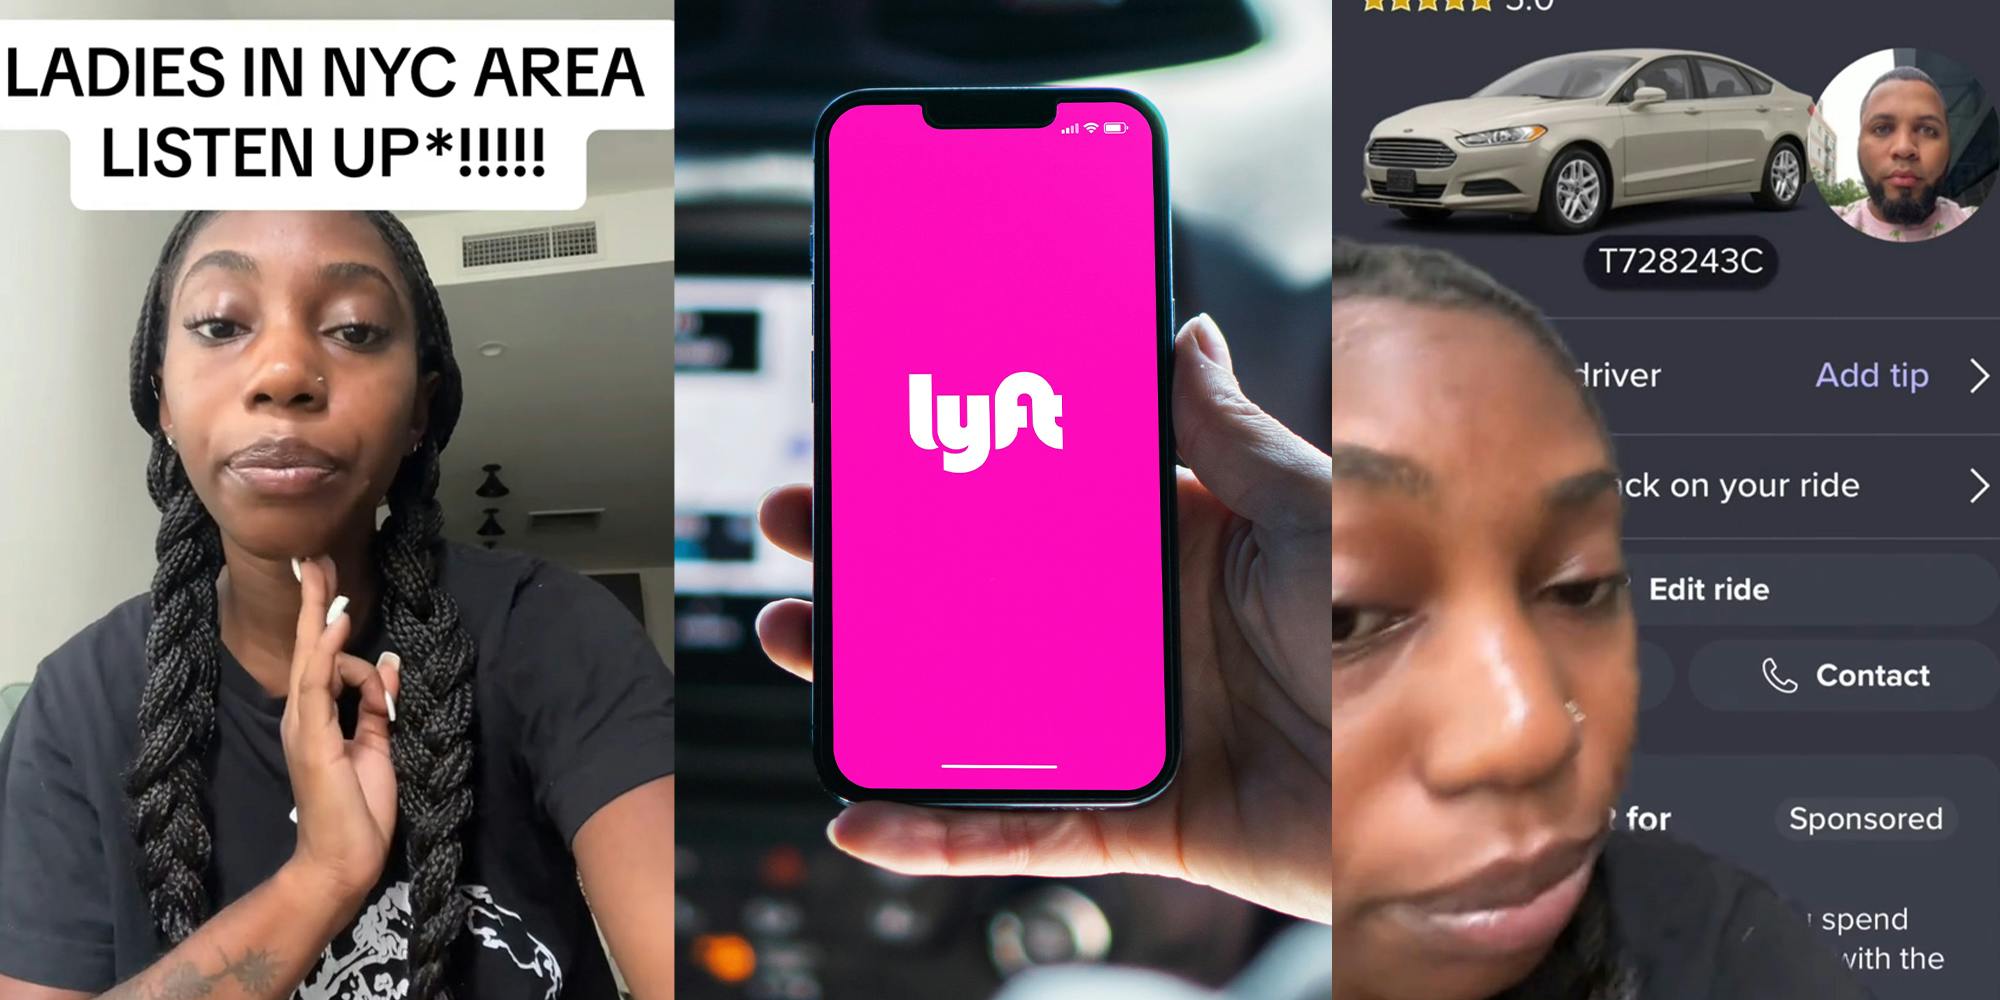 ‘This is so scary’: Woman says Lyft driver watched explicit video on his phone during ride